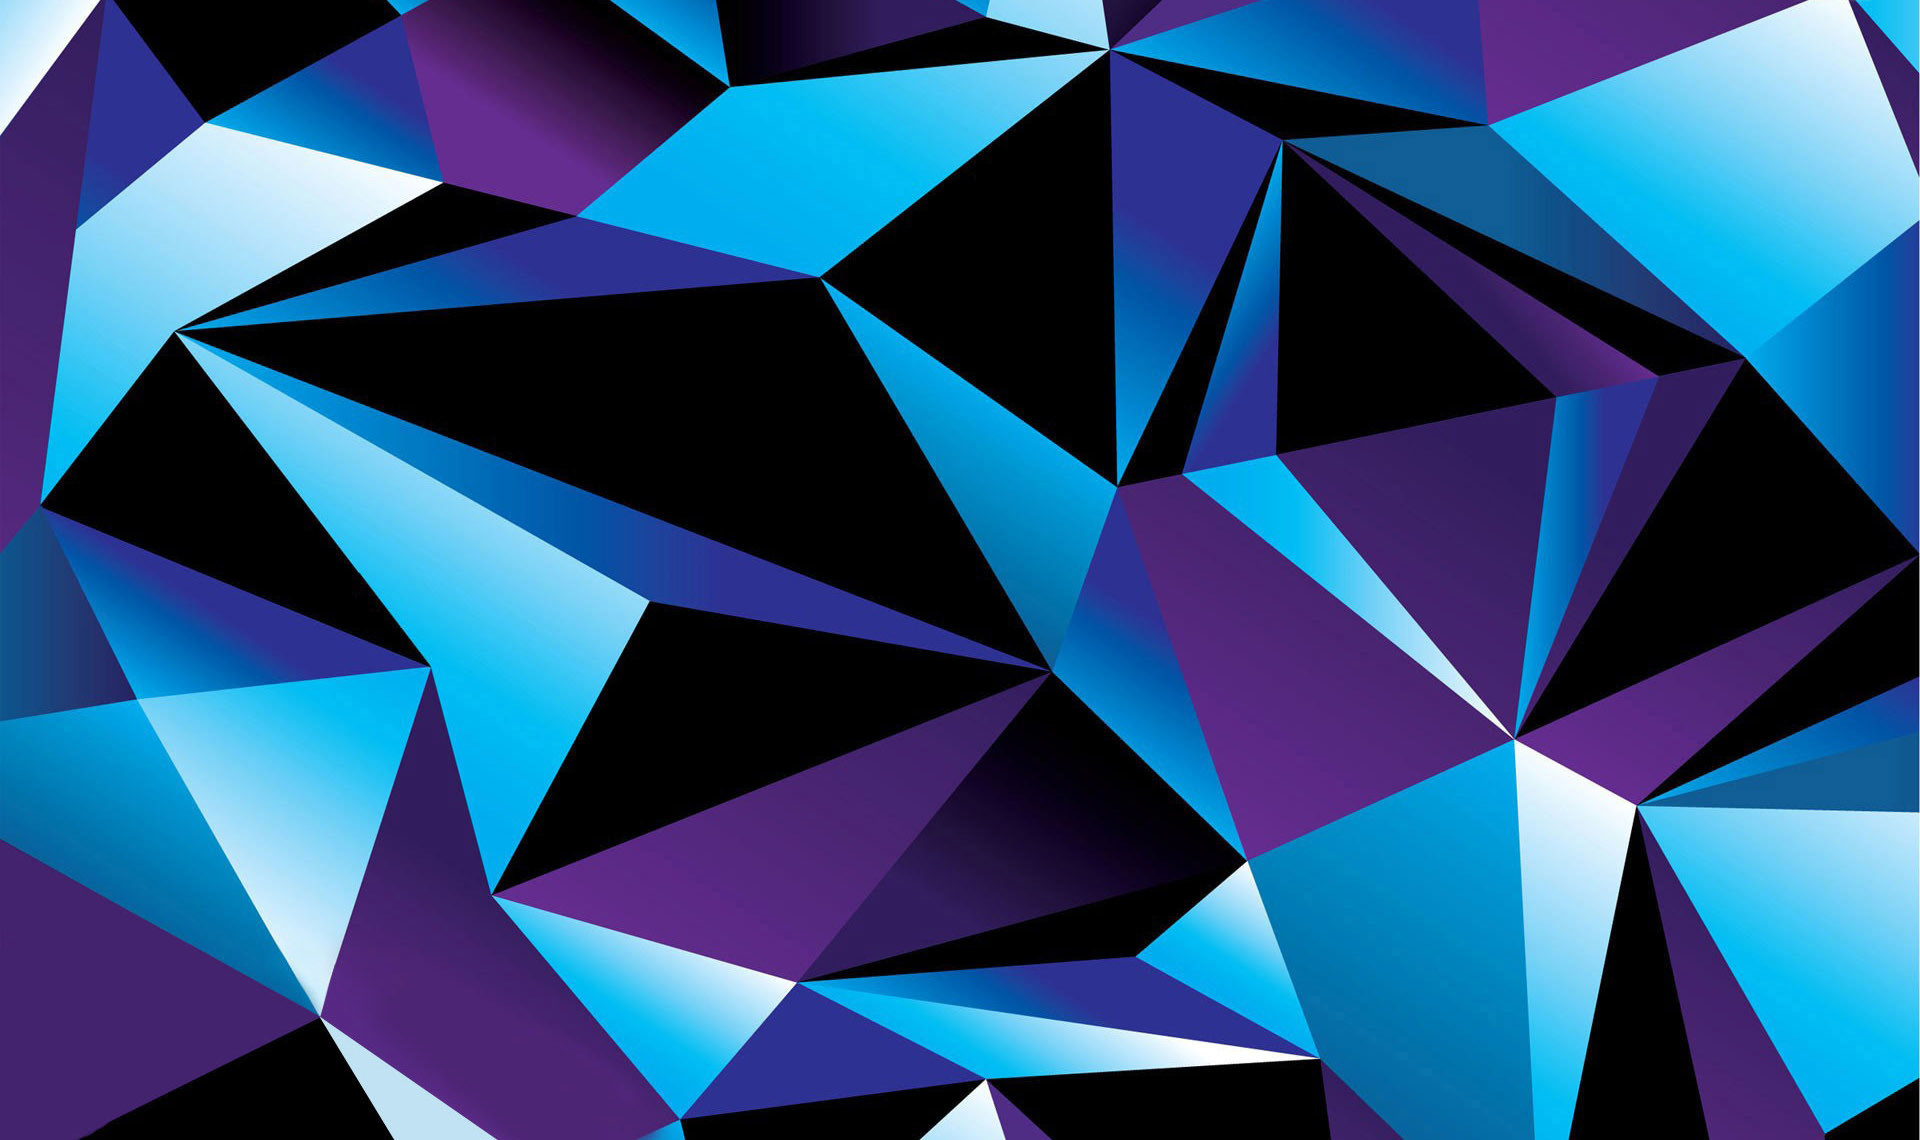 cool pattern wallpapers,blue,purple,pattern,violet,triangle